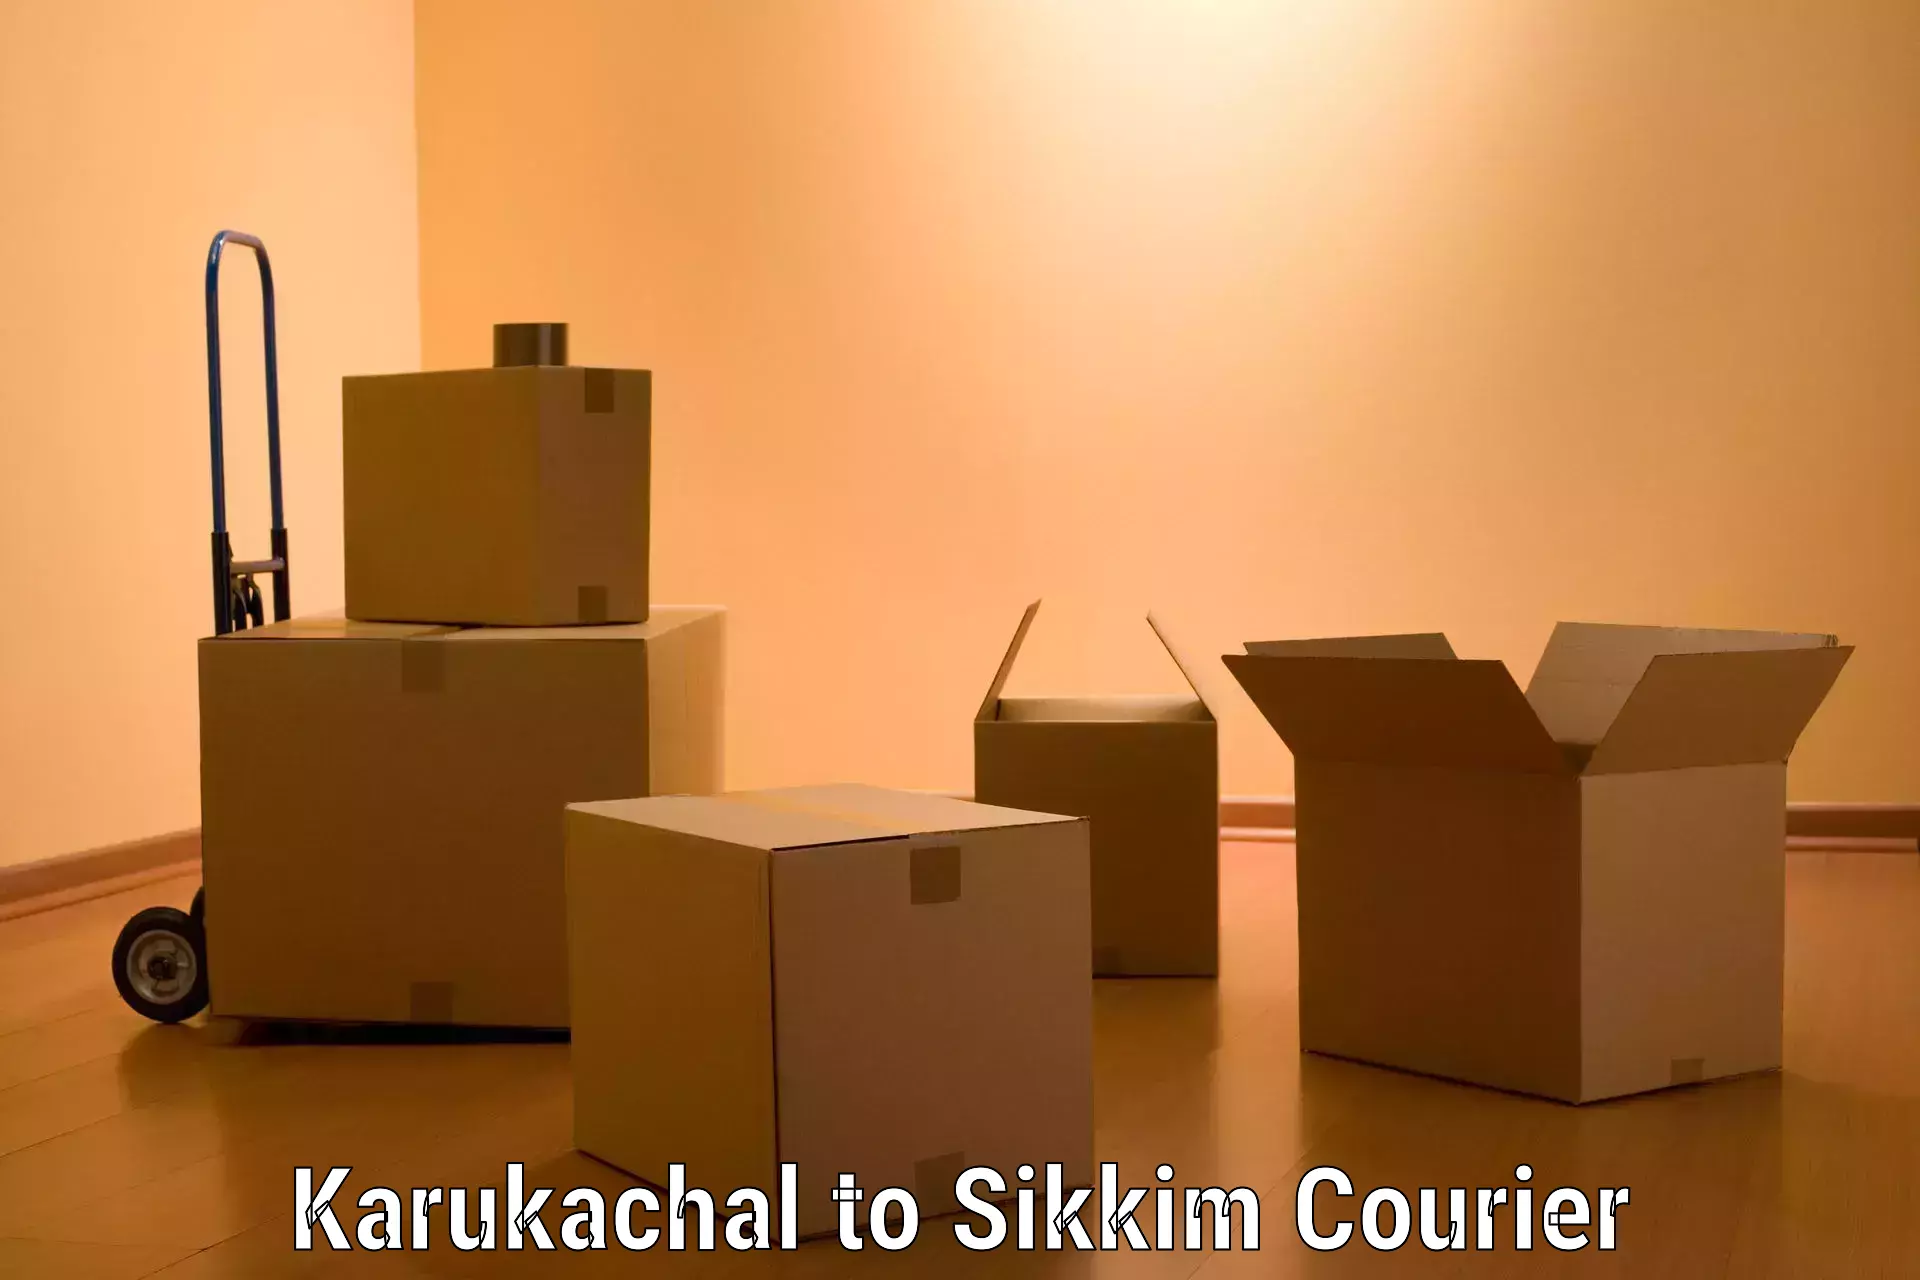 Furniture delivery service Karukachal to Sikkim